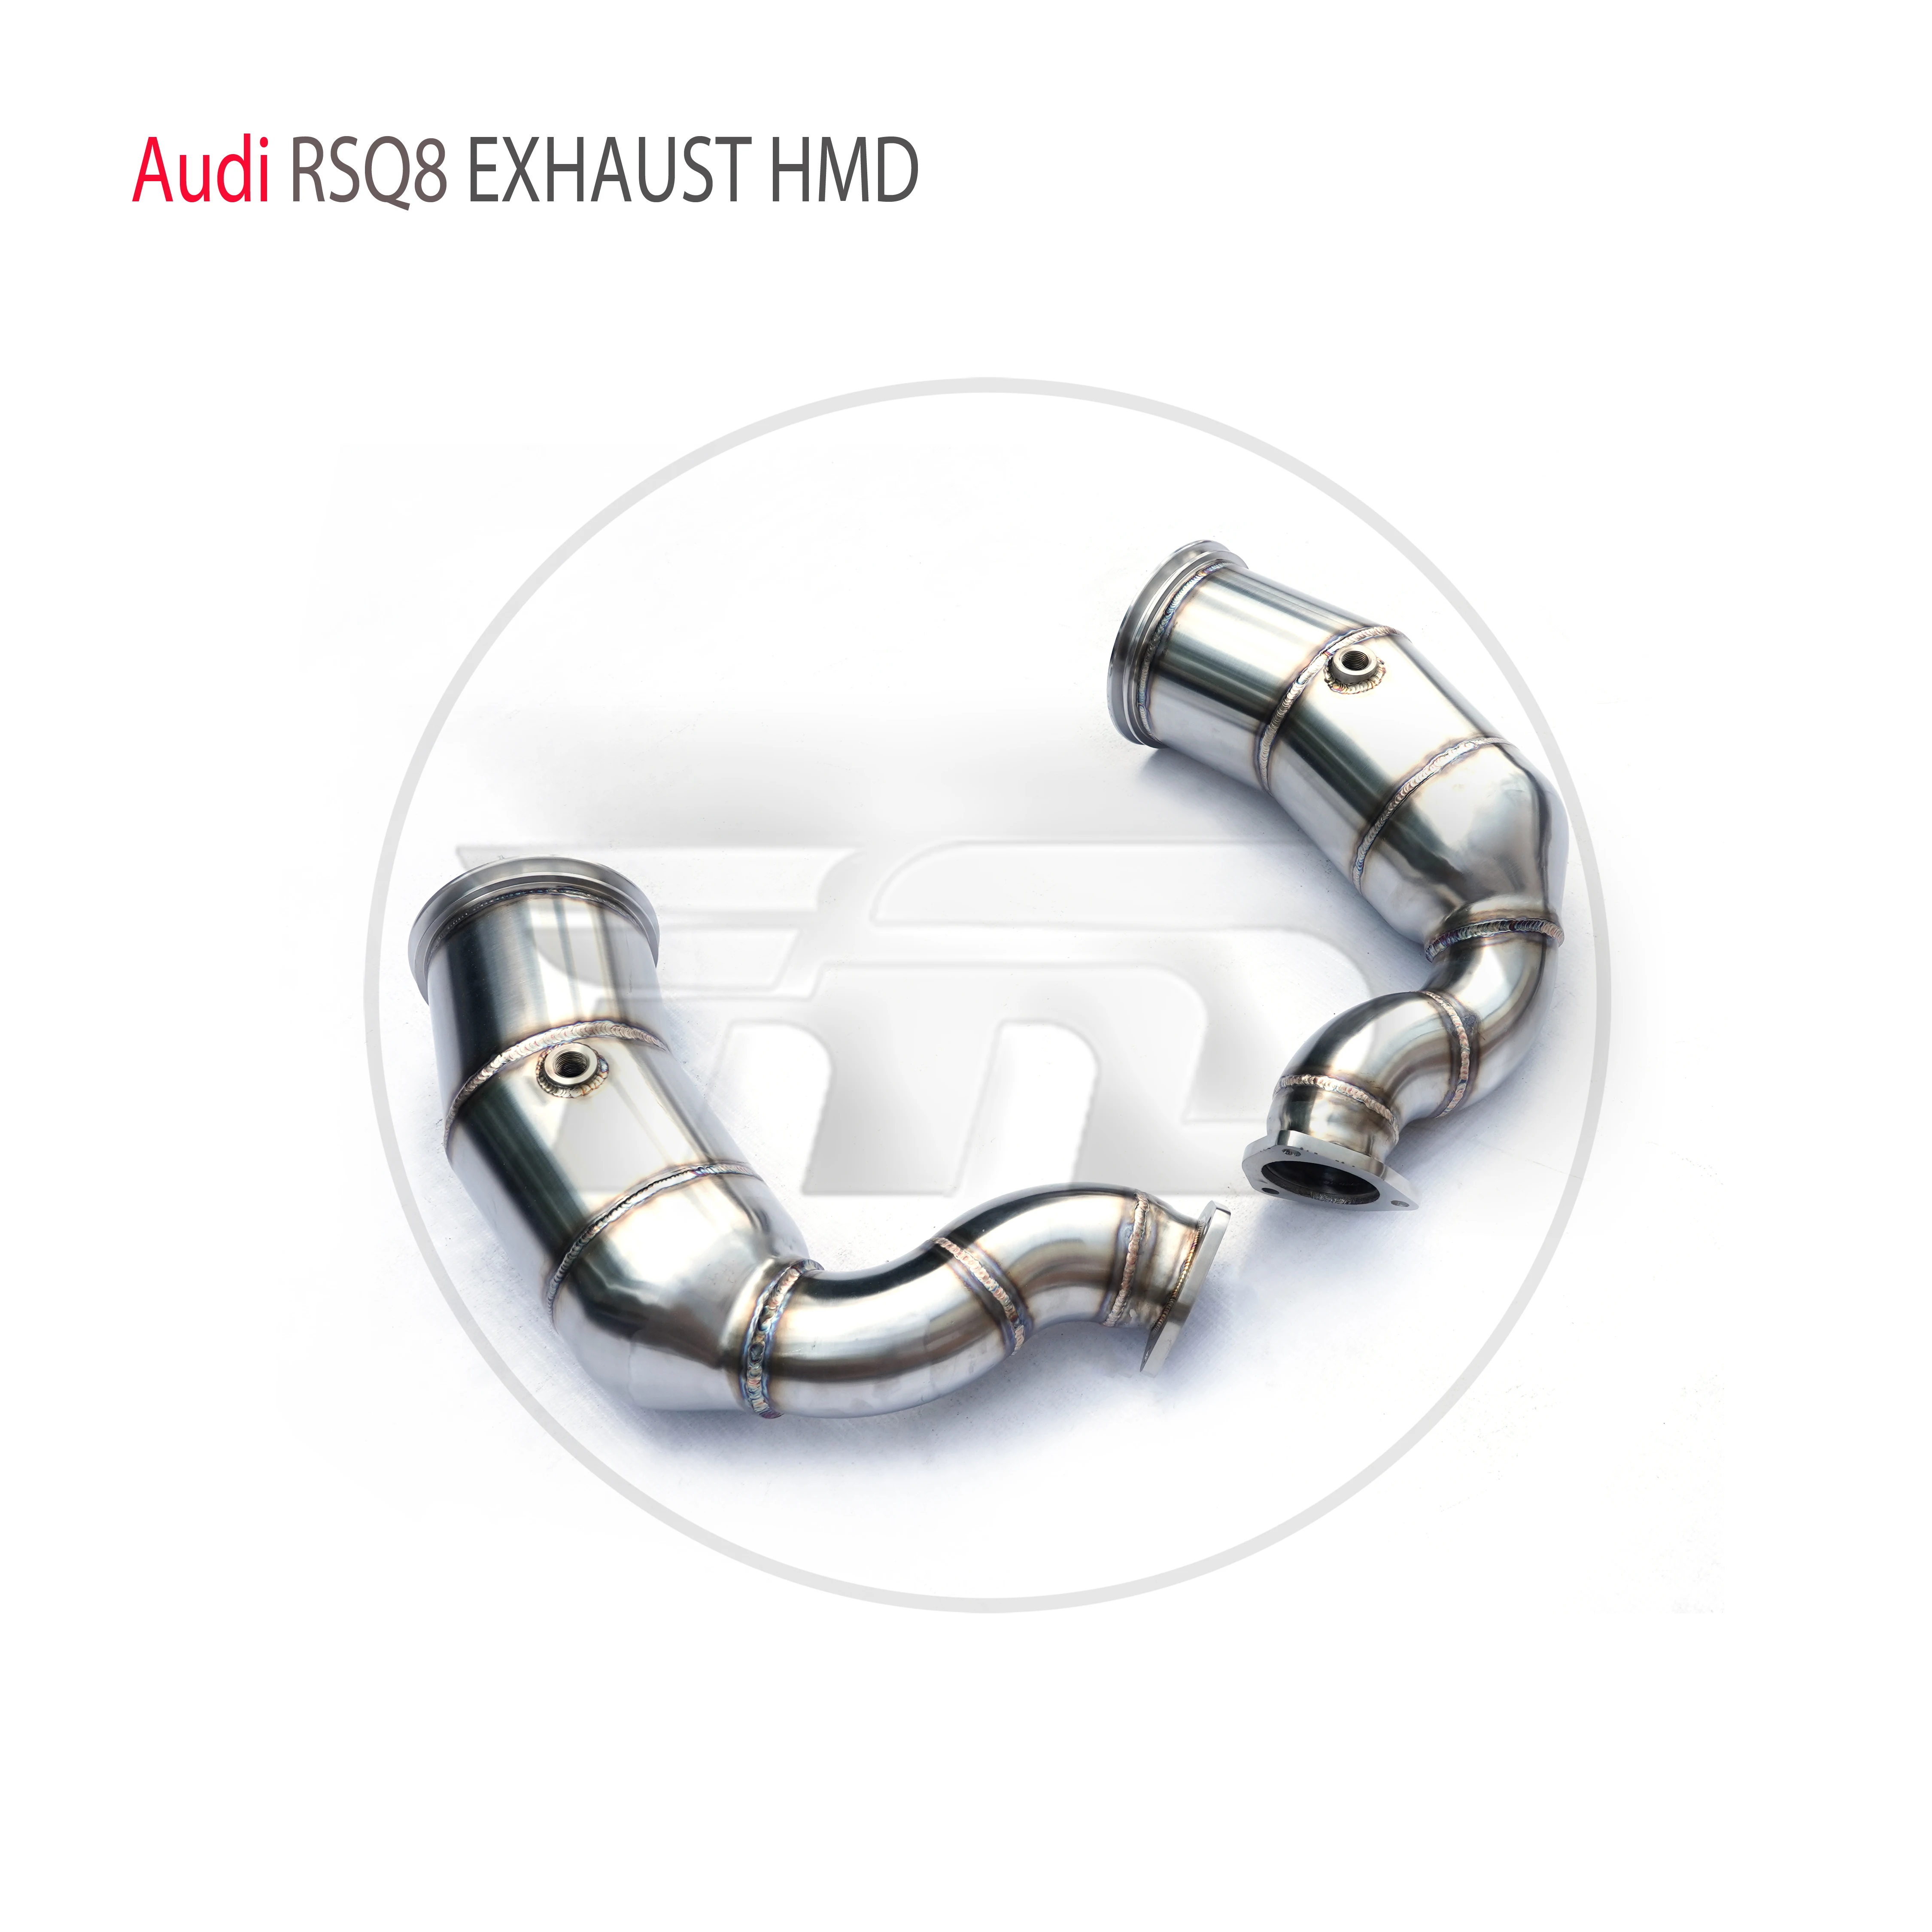 

HMD Exhaust System High Flow Performance Downpipe for Audi RSQ8 4.0T 2020+ Catalytic Converter Headers